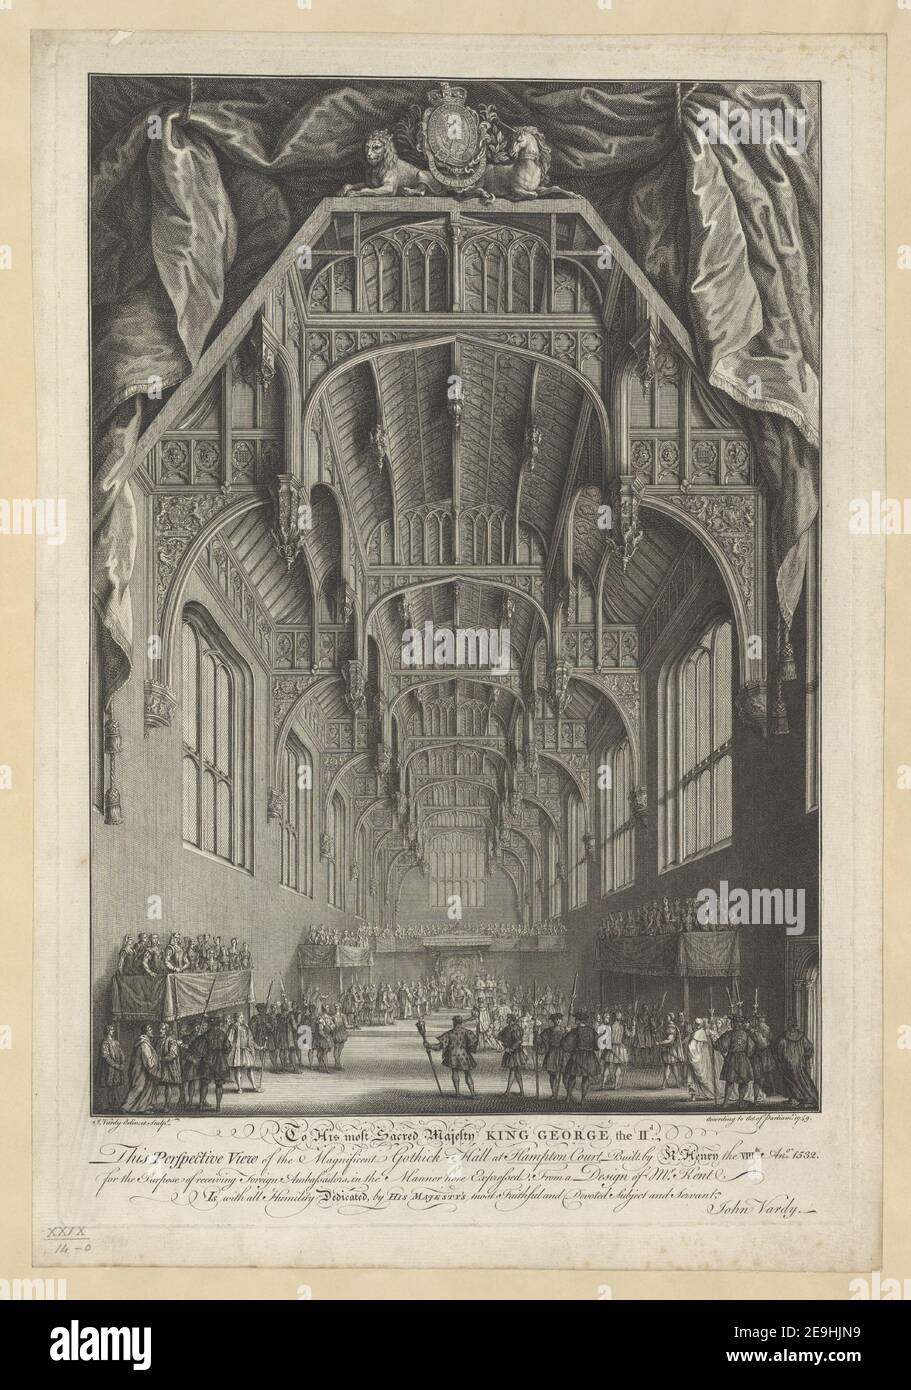 To His most Sacred Majesty KING GEORGE the IId. This Perspective View of the Magnificent Gothick Hall at Hampton Court Built by K. Henry the VIII.th AN.o 1532. for the Purpose of receiving Foreign Ambassadors, in t Author  Vardy, John 29.14.o. Place of publication: [London] Publisher: [J. Vardy] According to Act of Parliam.t, Date of publication: 1749.  Item type: 1 print Medium: etching and engraving Dimensions: platemark 51.5 x 34.5 cm  Former owner: George III, King of Great Britain, 1738-1820 Stock Photo